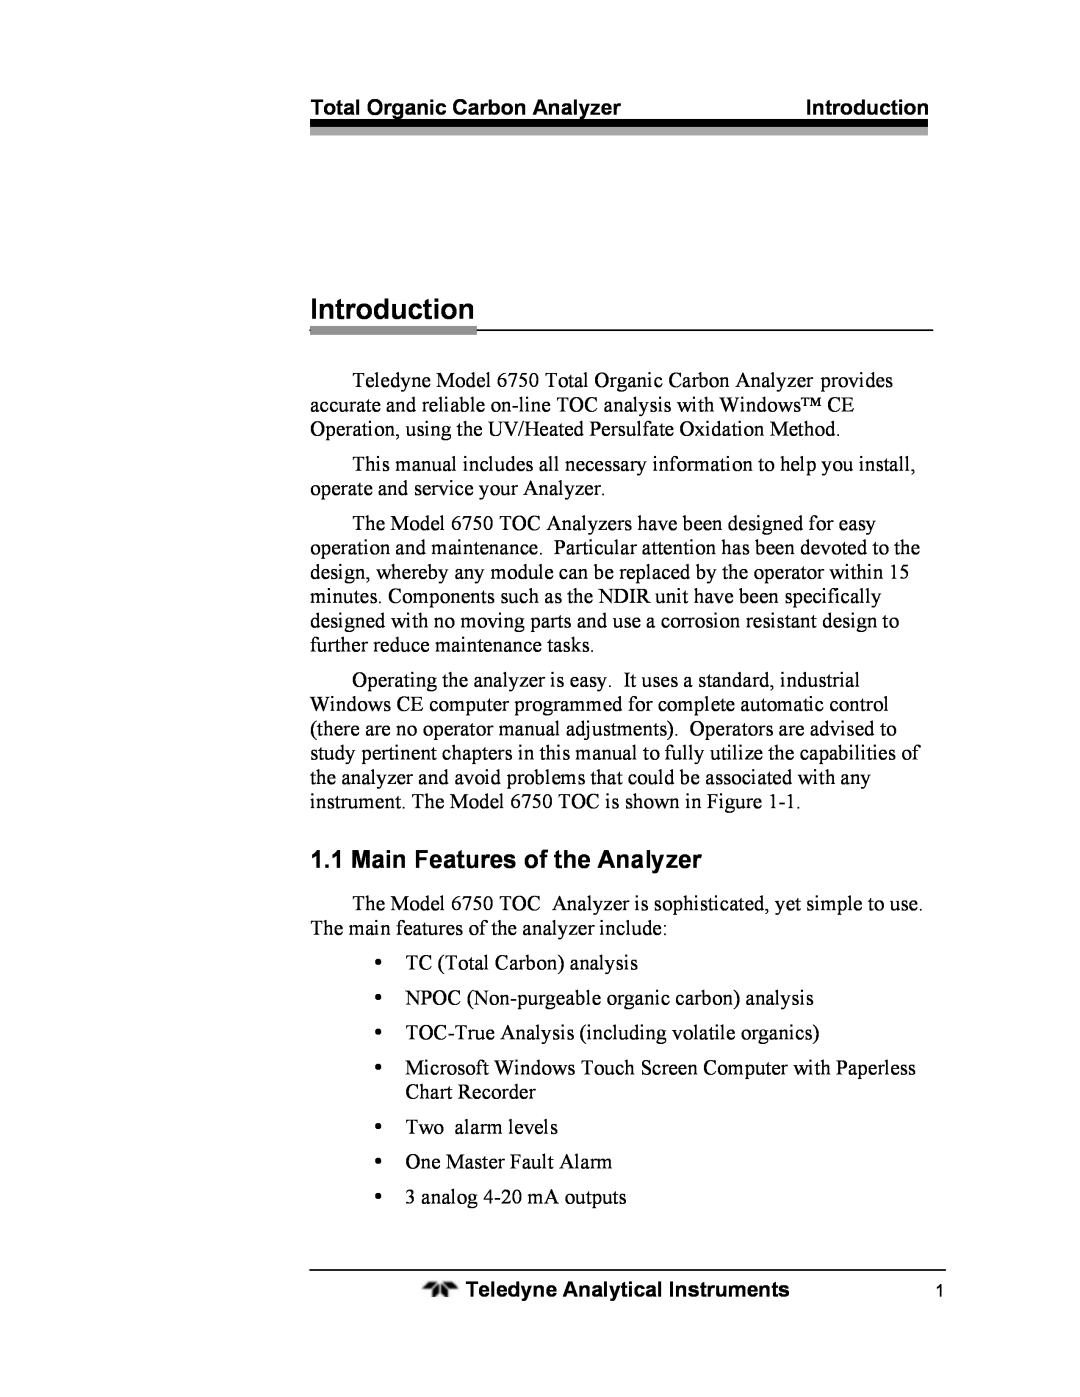 Teledyne 6750 operating instructions Introduction, Main Features of the Analyzer 